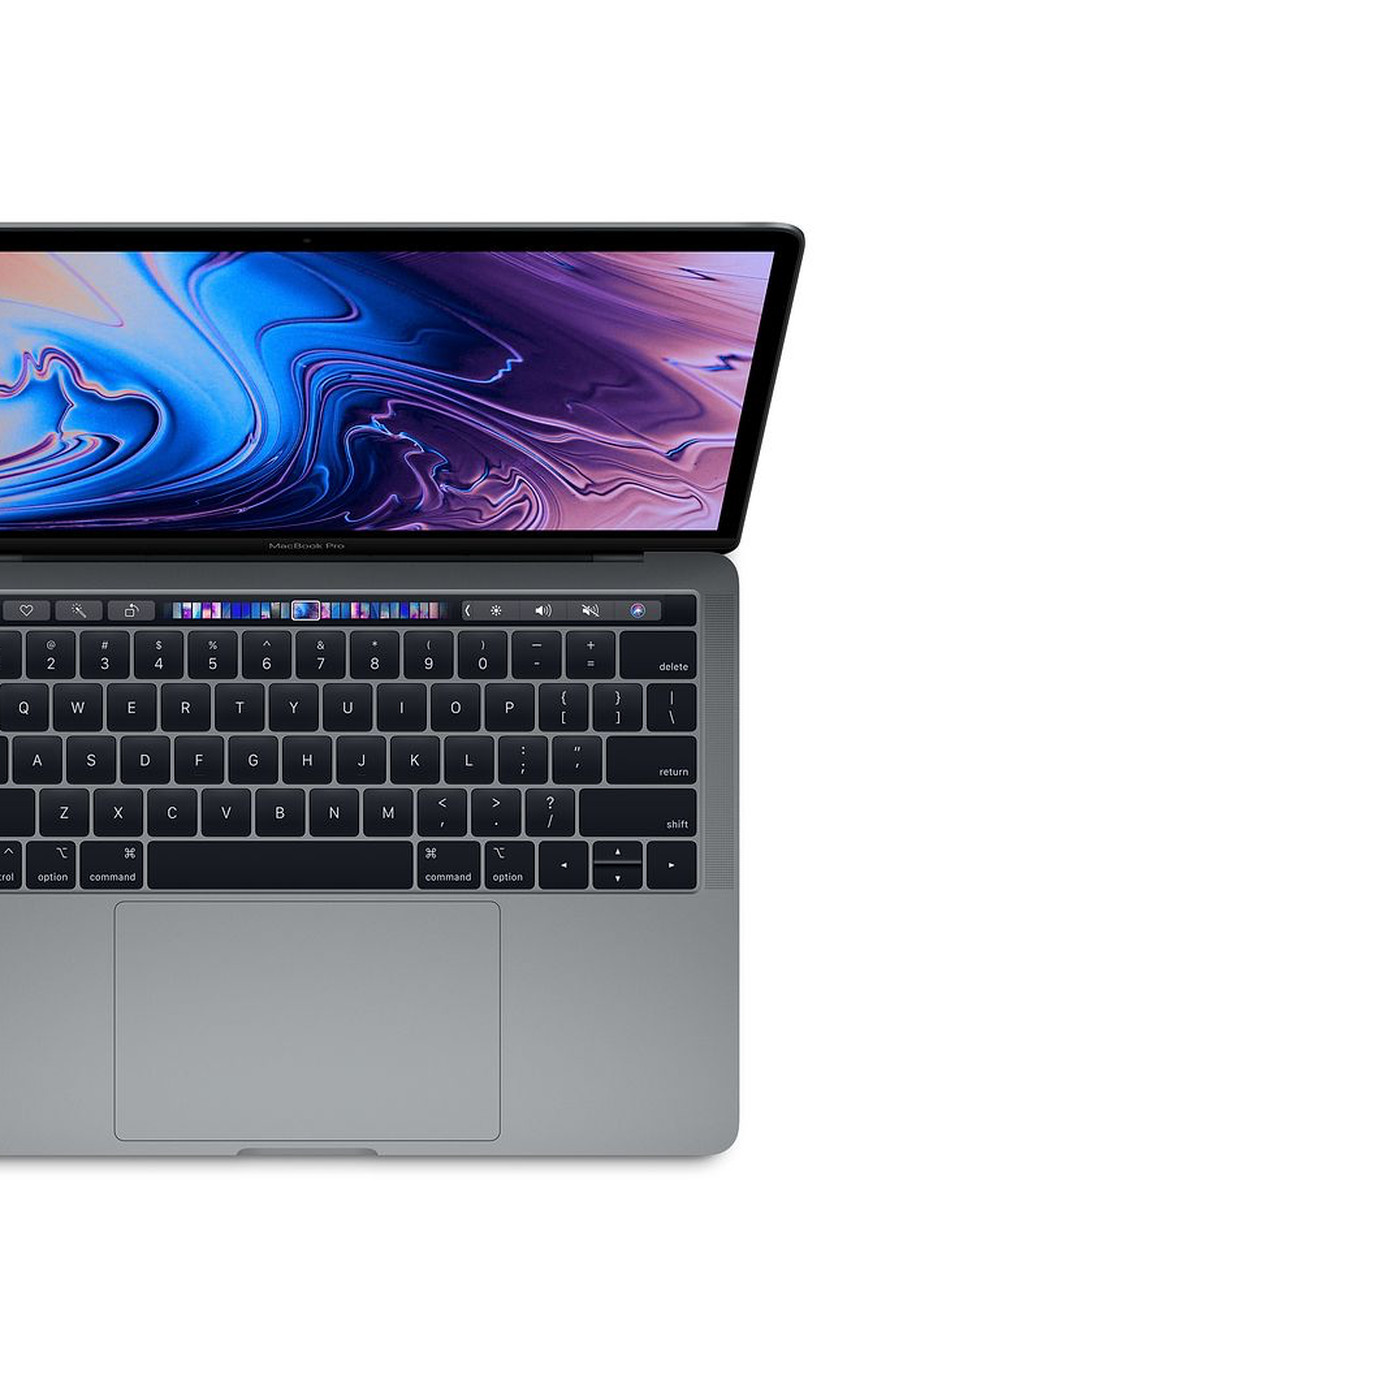 Apple's new 13-inch Touch Bar MacBook Pros now have four full